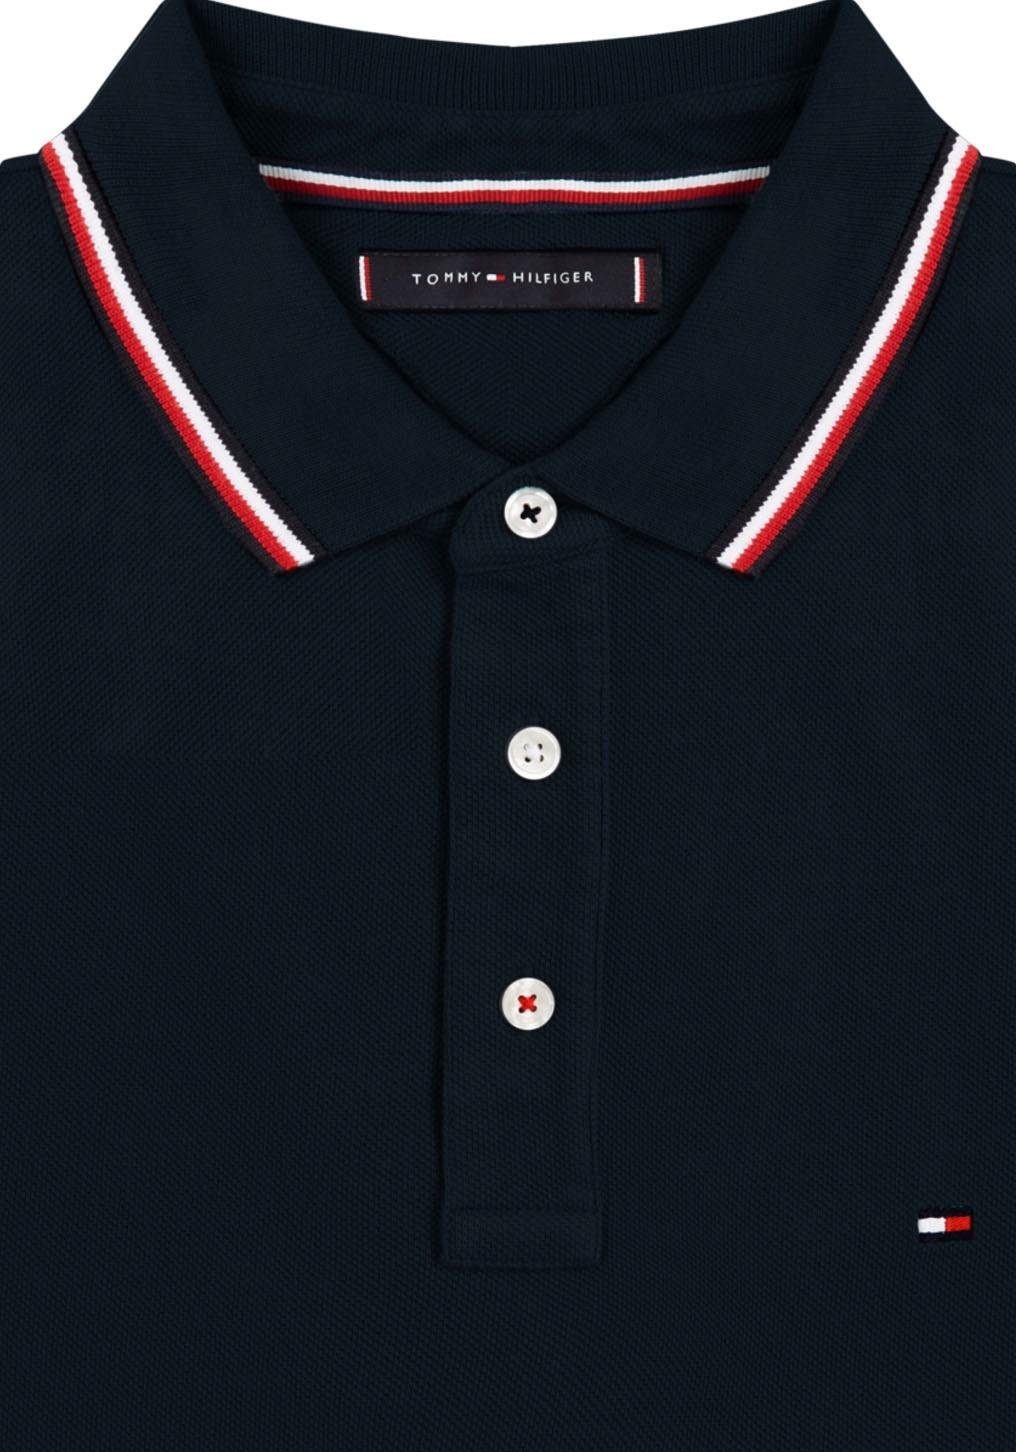 Tommy Hilfiger Poloshirt »TOMMY TIPPED bei SLIM OTTO POLO« online kaufen